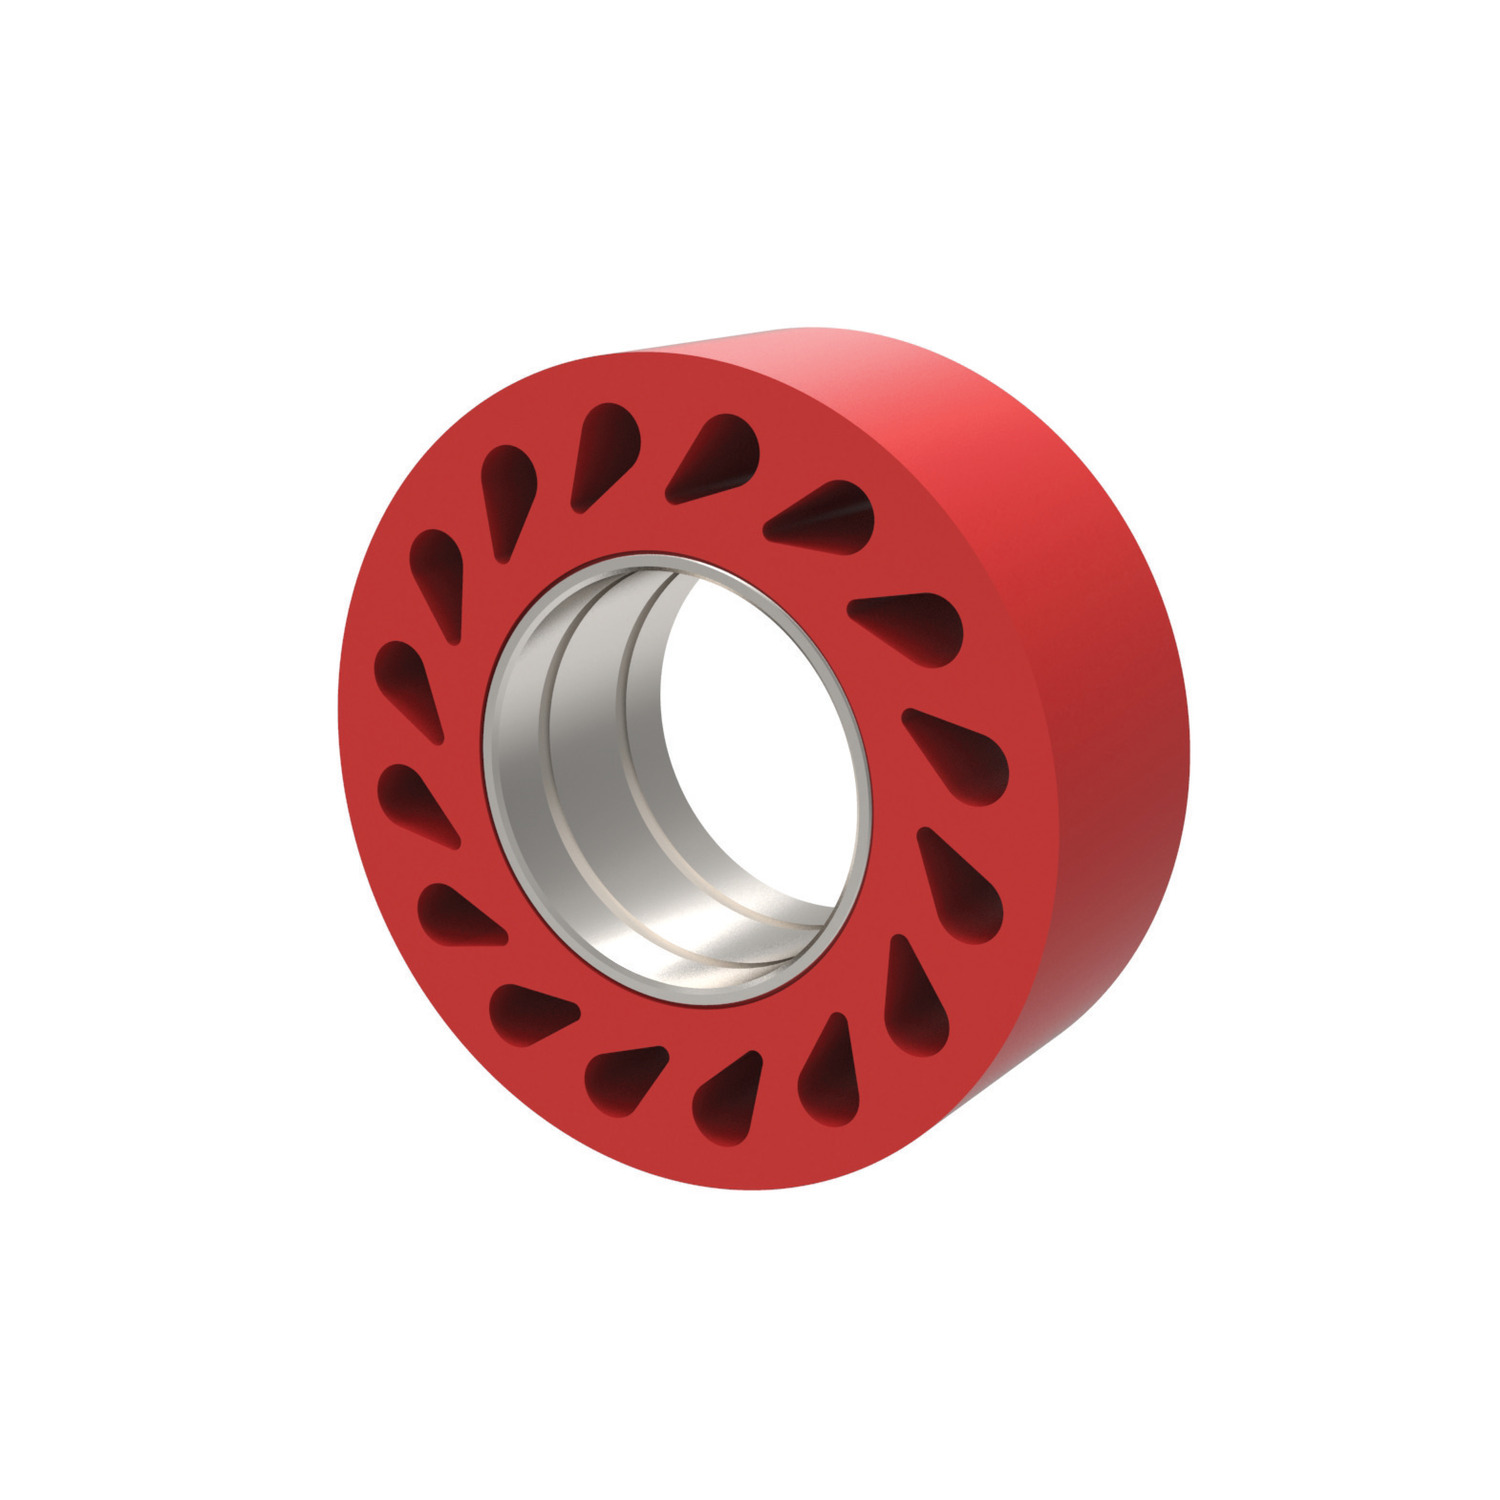 Product 60640, Durasoft Roller roller only / 